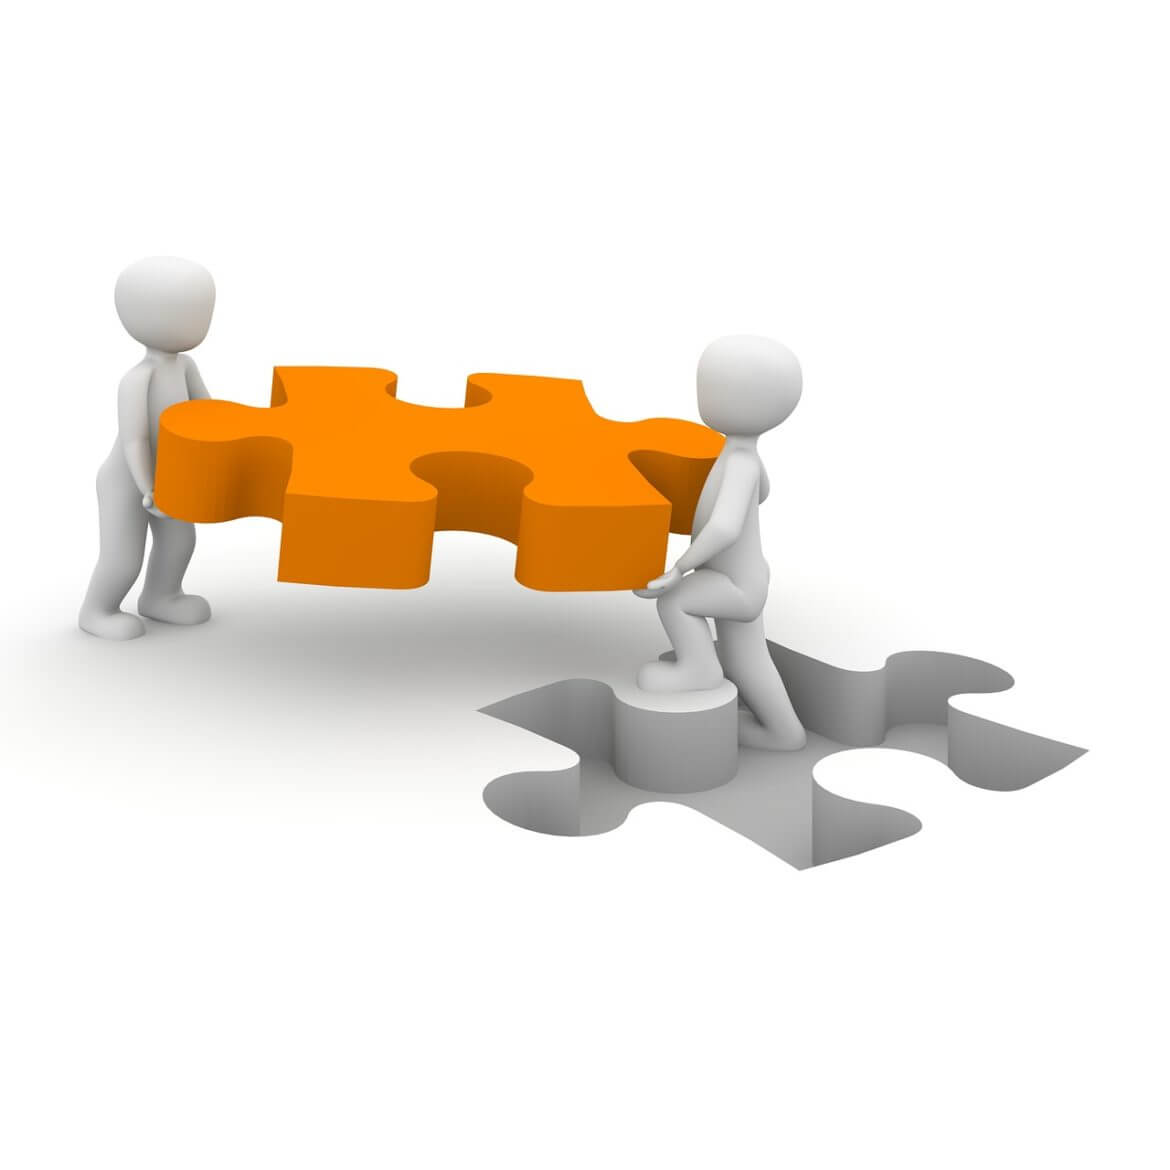 Fitting the pieces together for project management